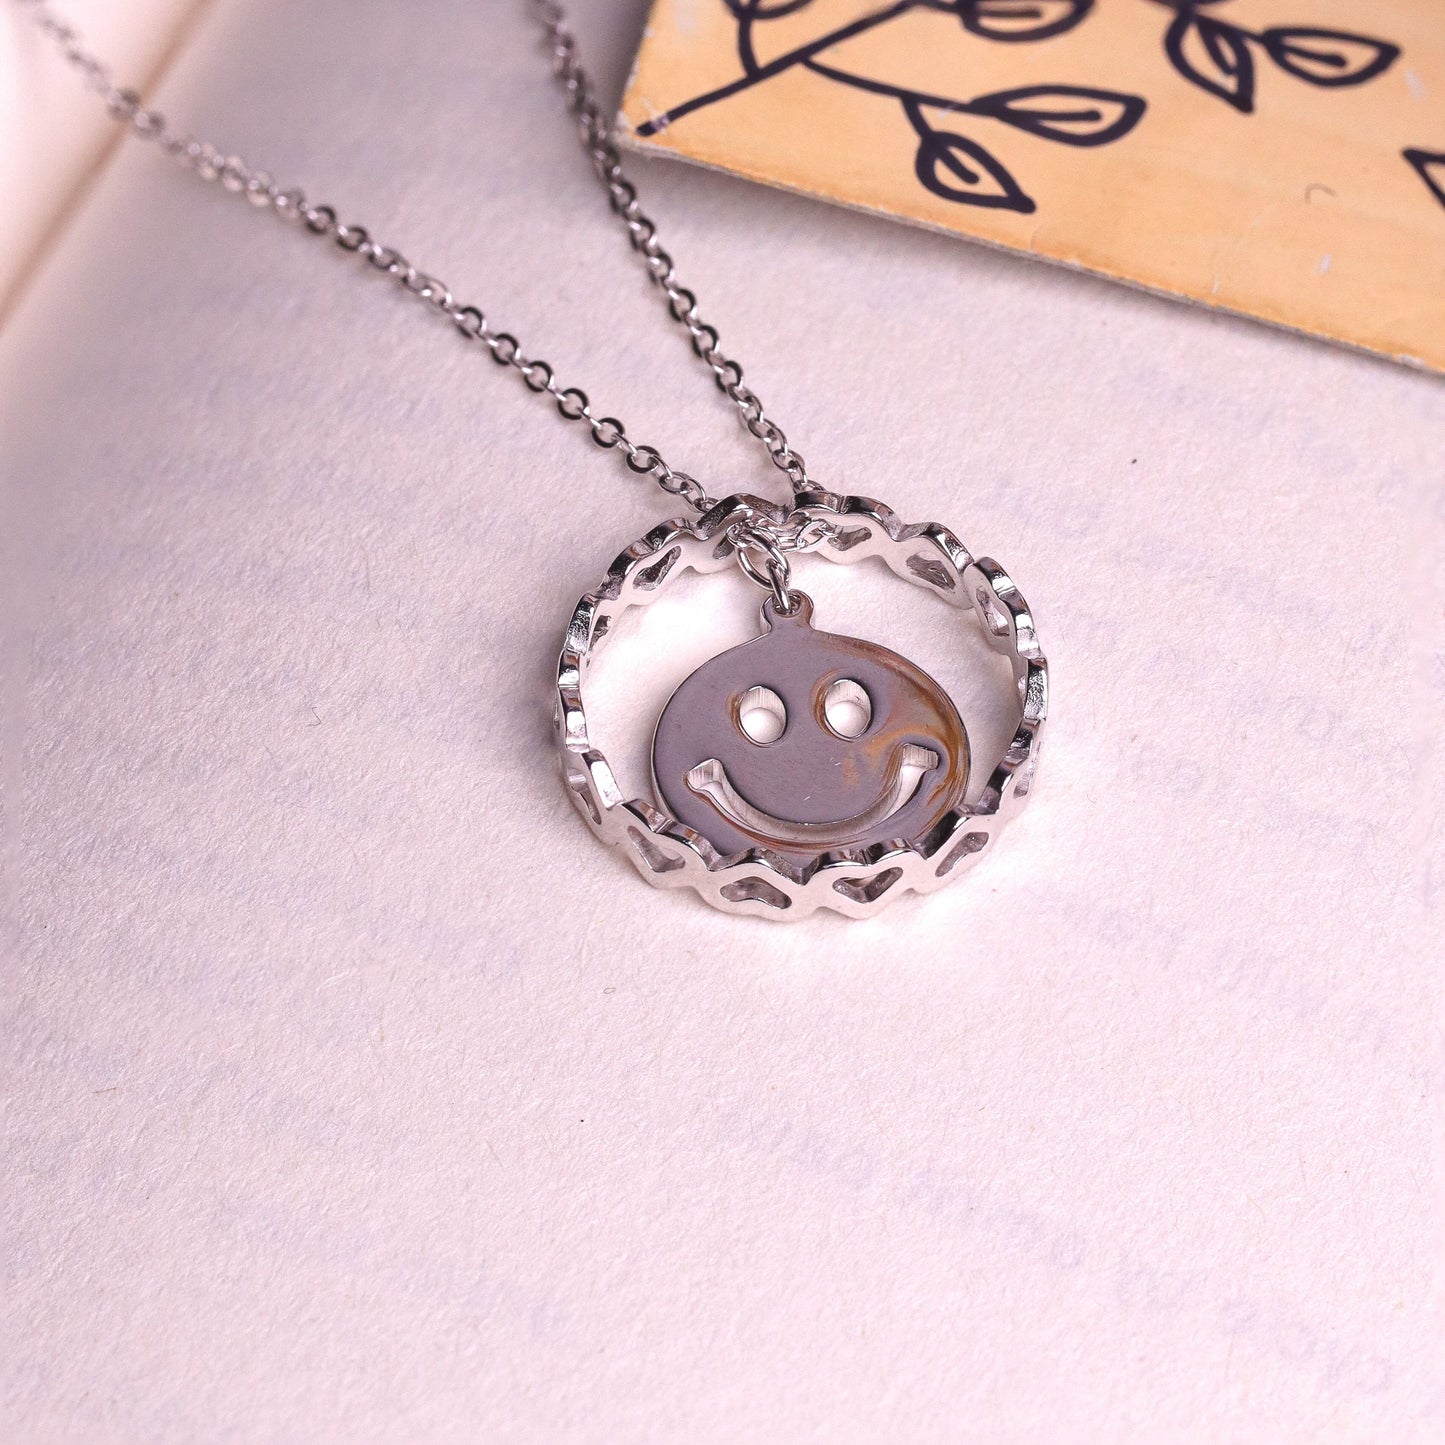 Silver Smiley Ring Chain Pendant